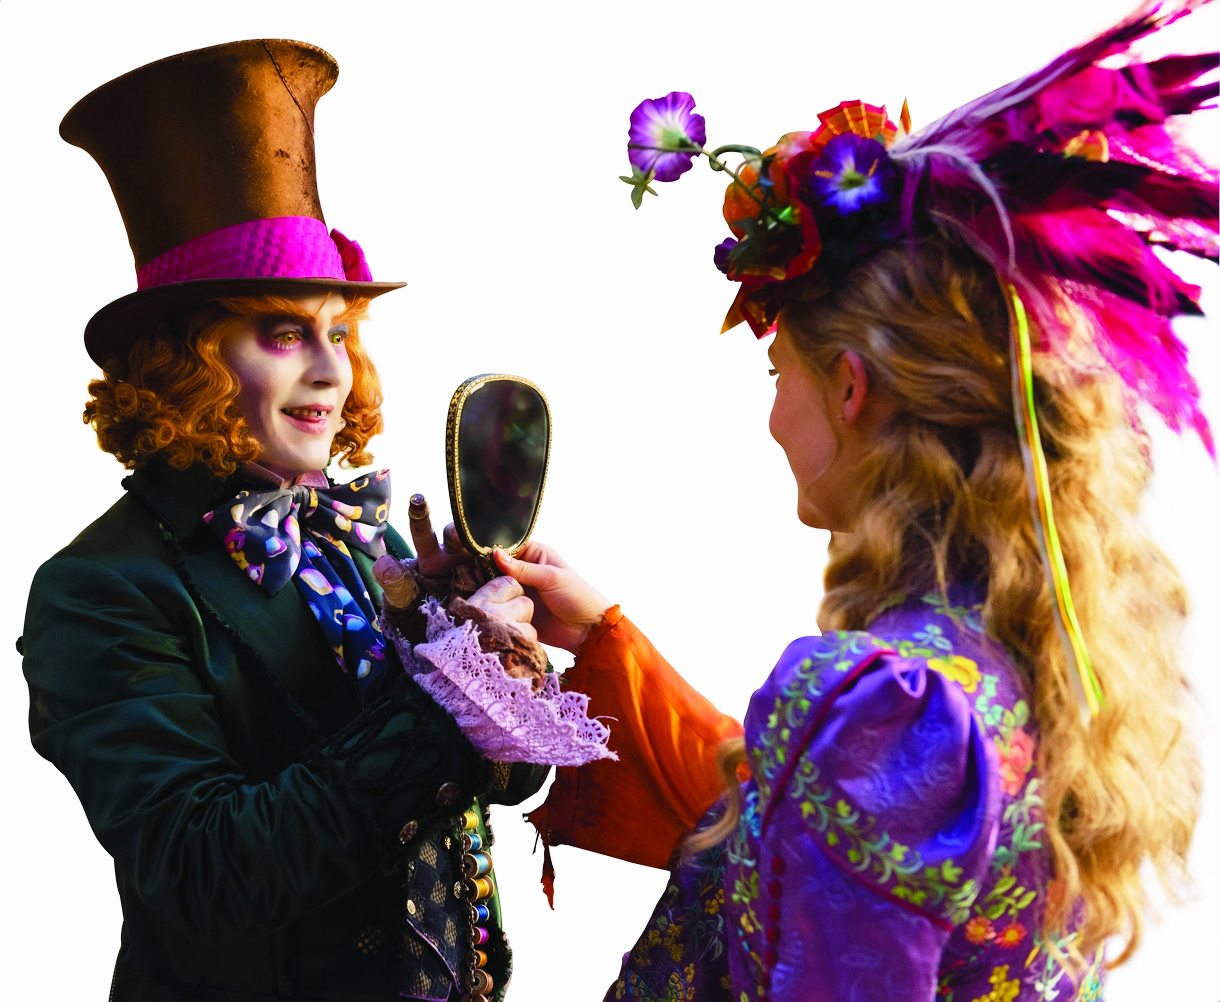 Alice (Mia Wasikowska) returns to the whimsical world of Underland and travels back in time to save the Mad Hatter (Johnny Depp) in Disney's ALICE THROUGH THE LOOKING GLASS, an all-new adventure featuring the unforgettable characters from Lewis Carroll's beloved stories. Alice In Wonderland: Through The Looking Glass